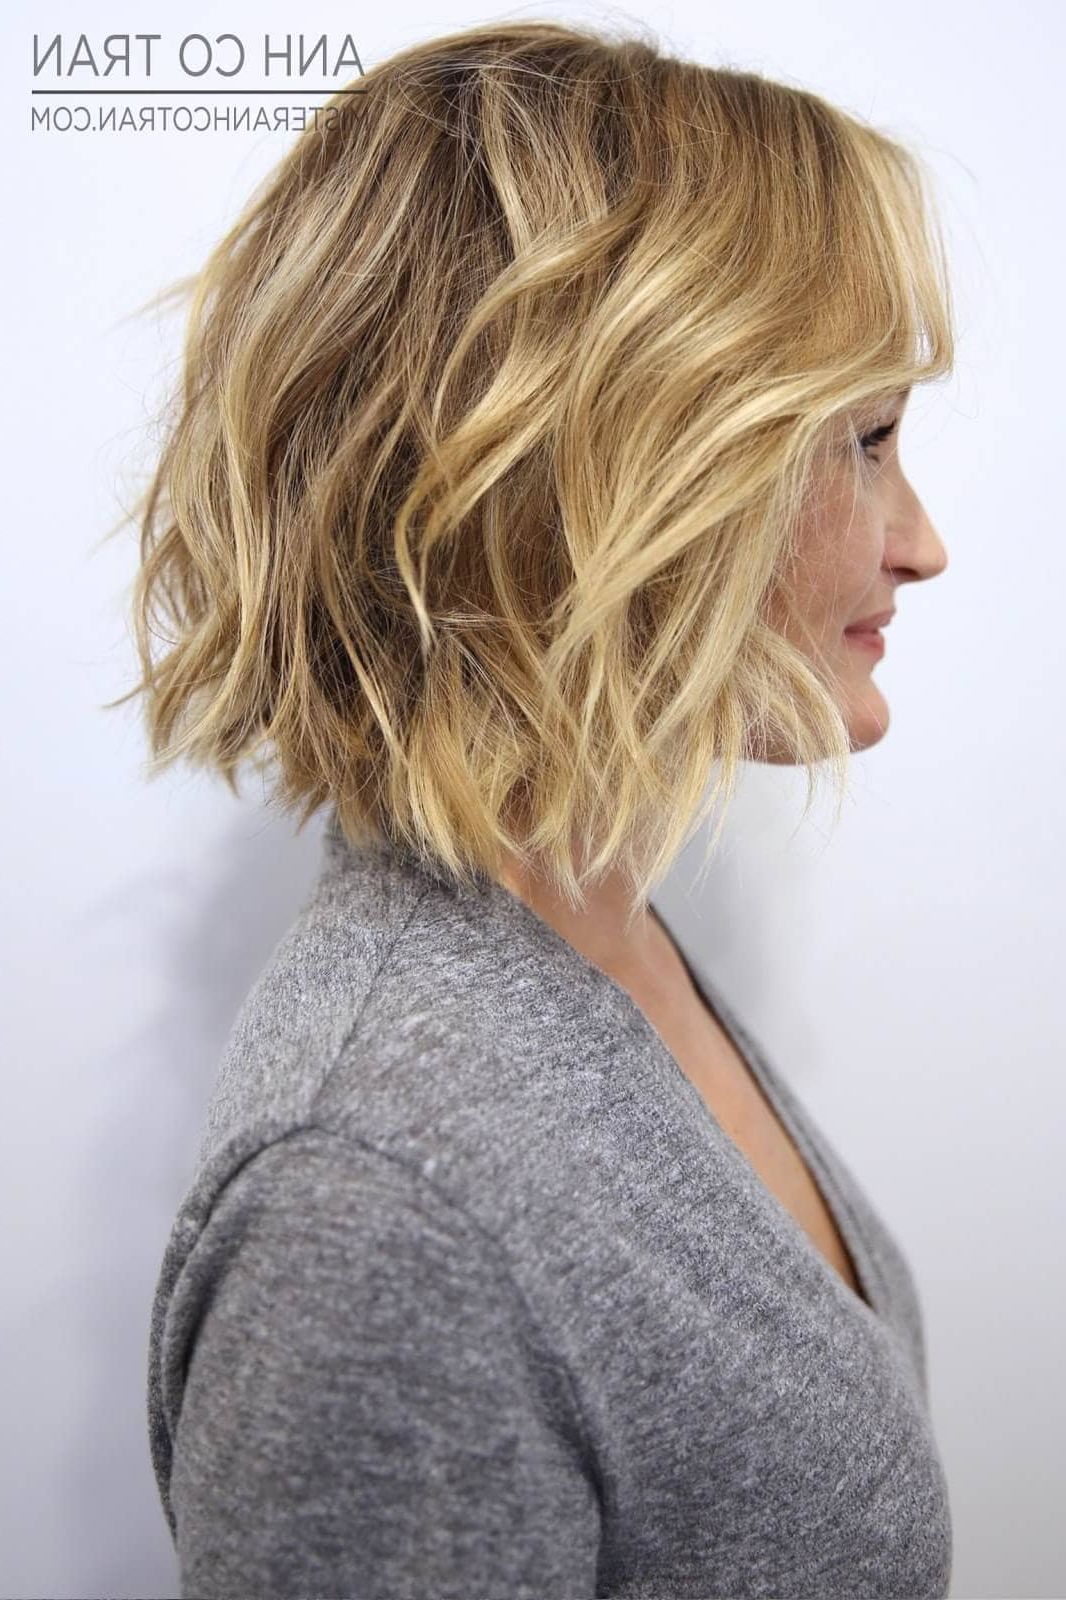 50 Ways To Wear Short Hair With Bangs For A Fresh New Look Intended For Short Haircuts With Side Bangs (View 2 of 25)